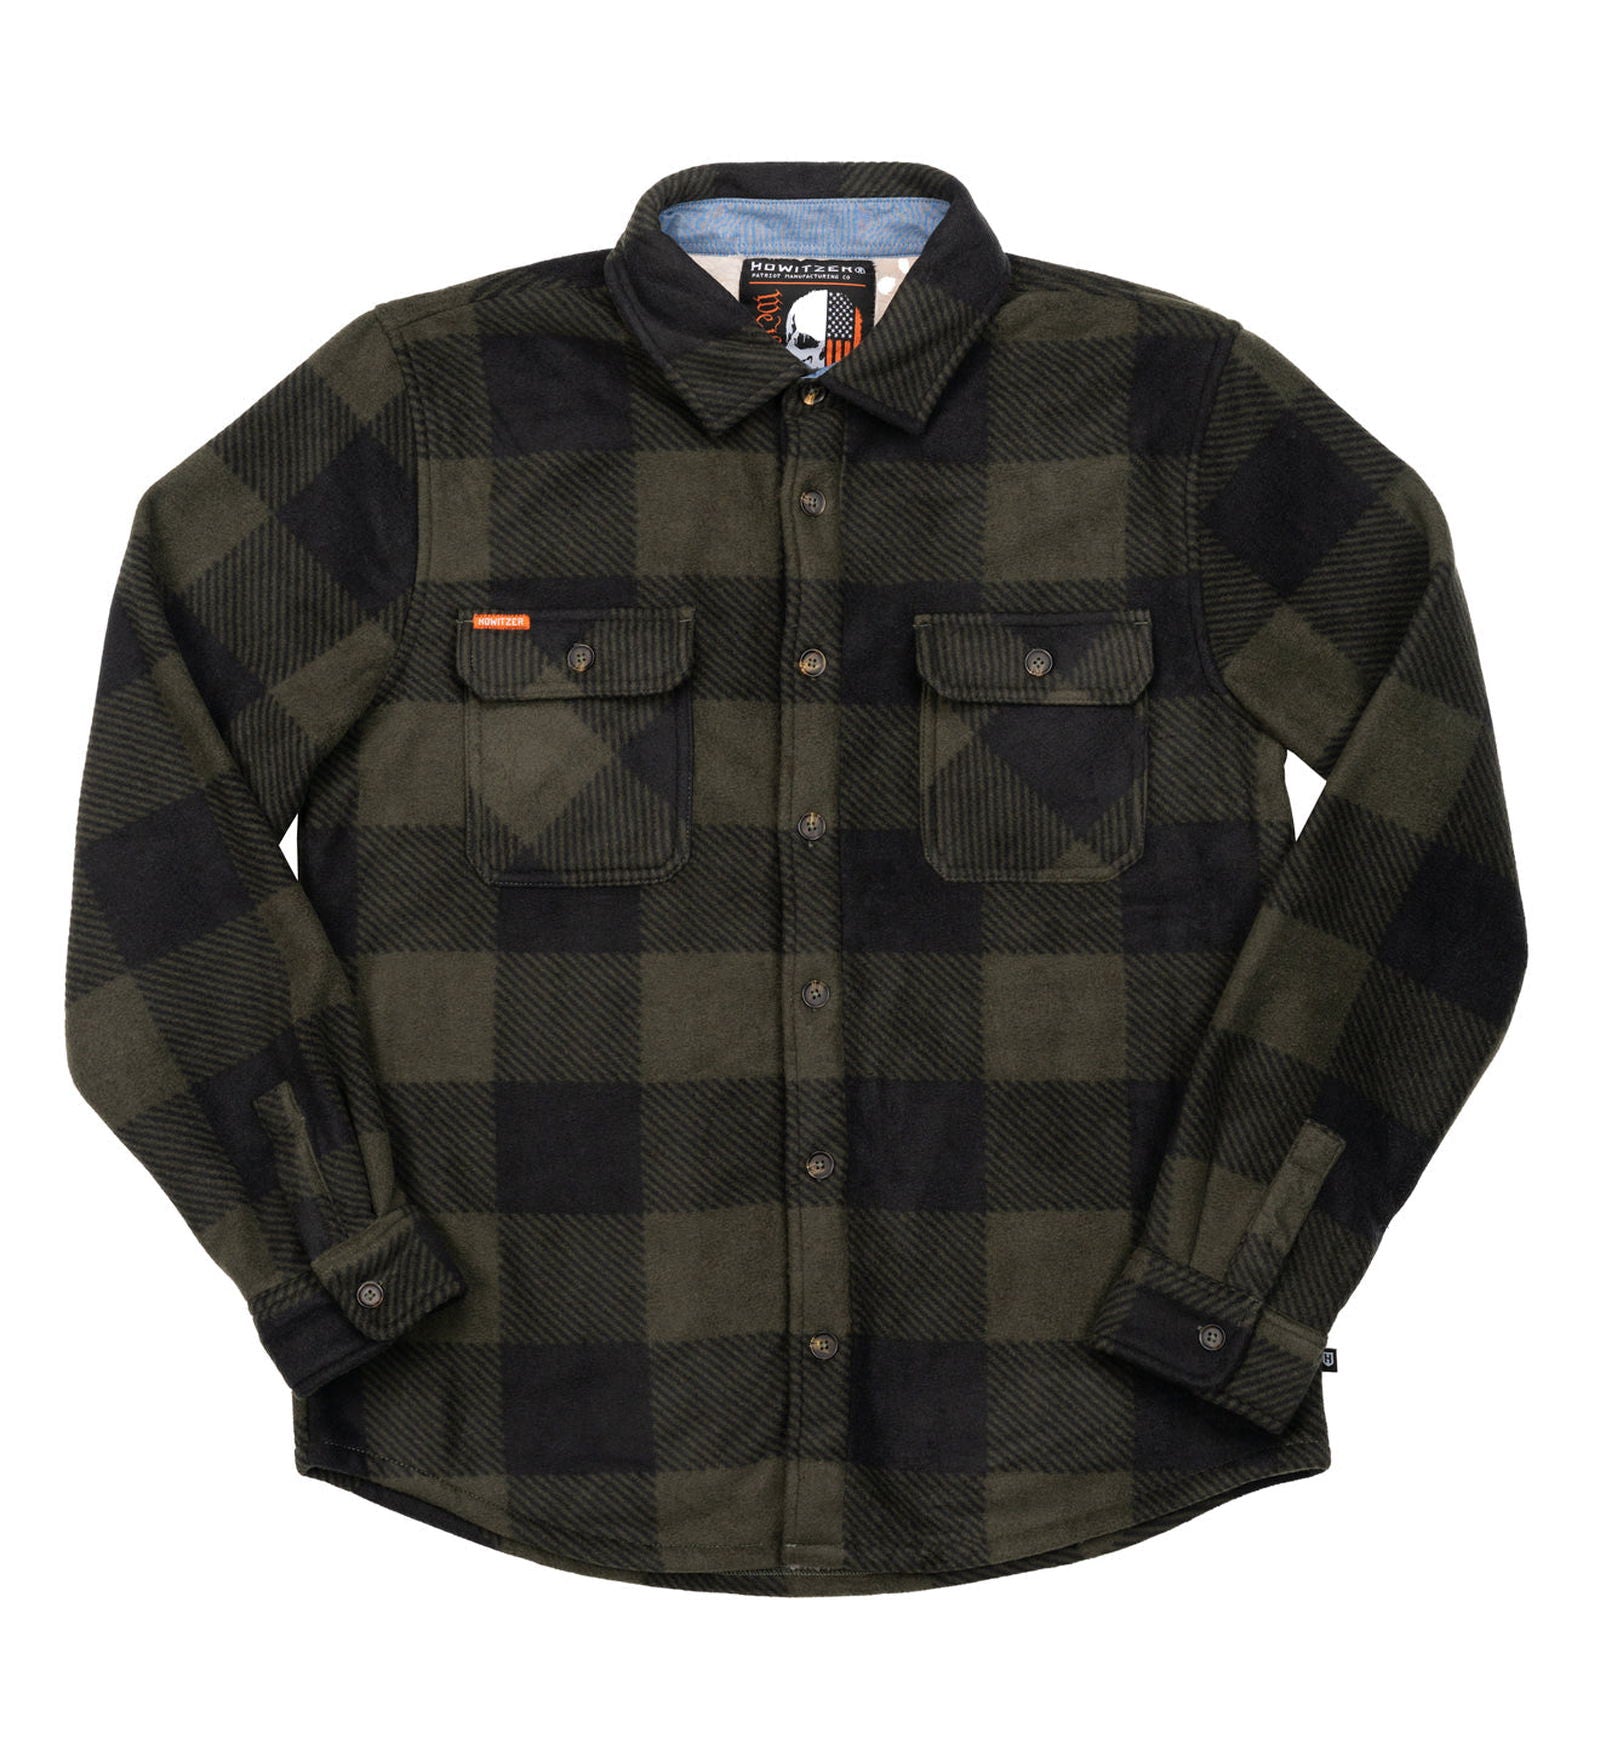 Union Flannel - Howitzer Clothing